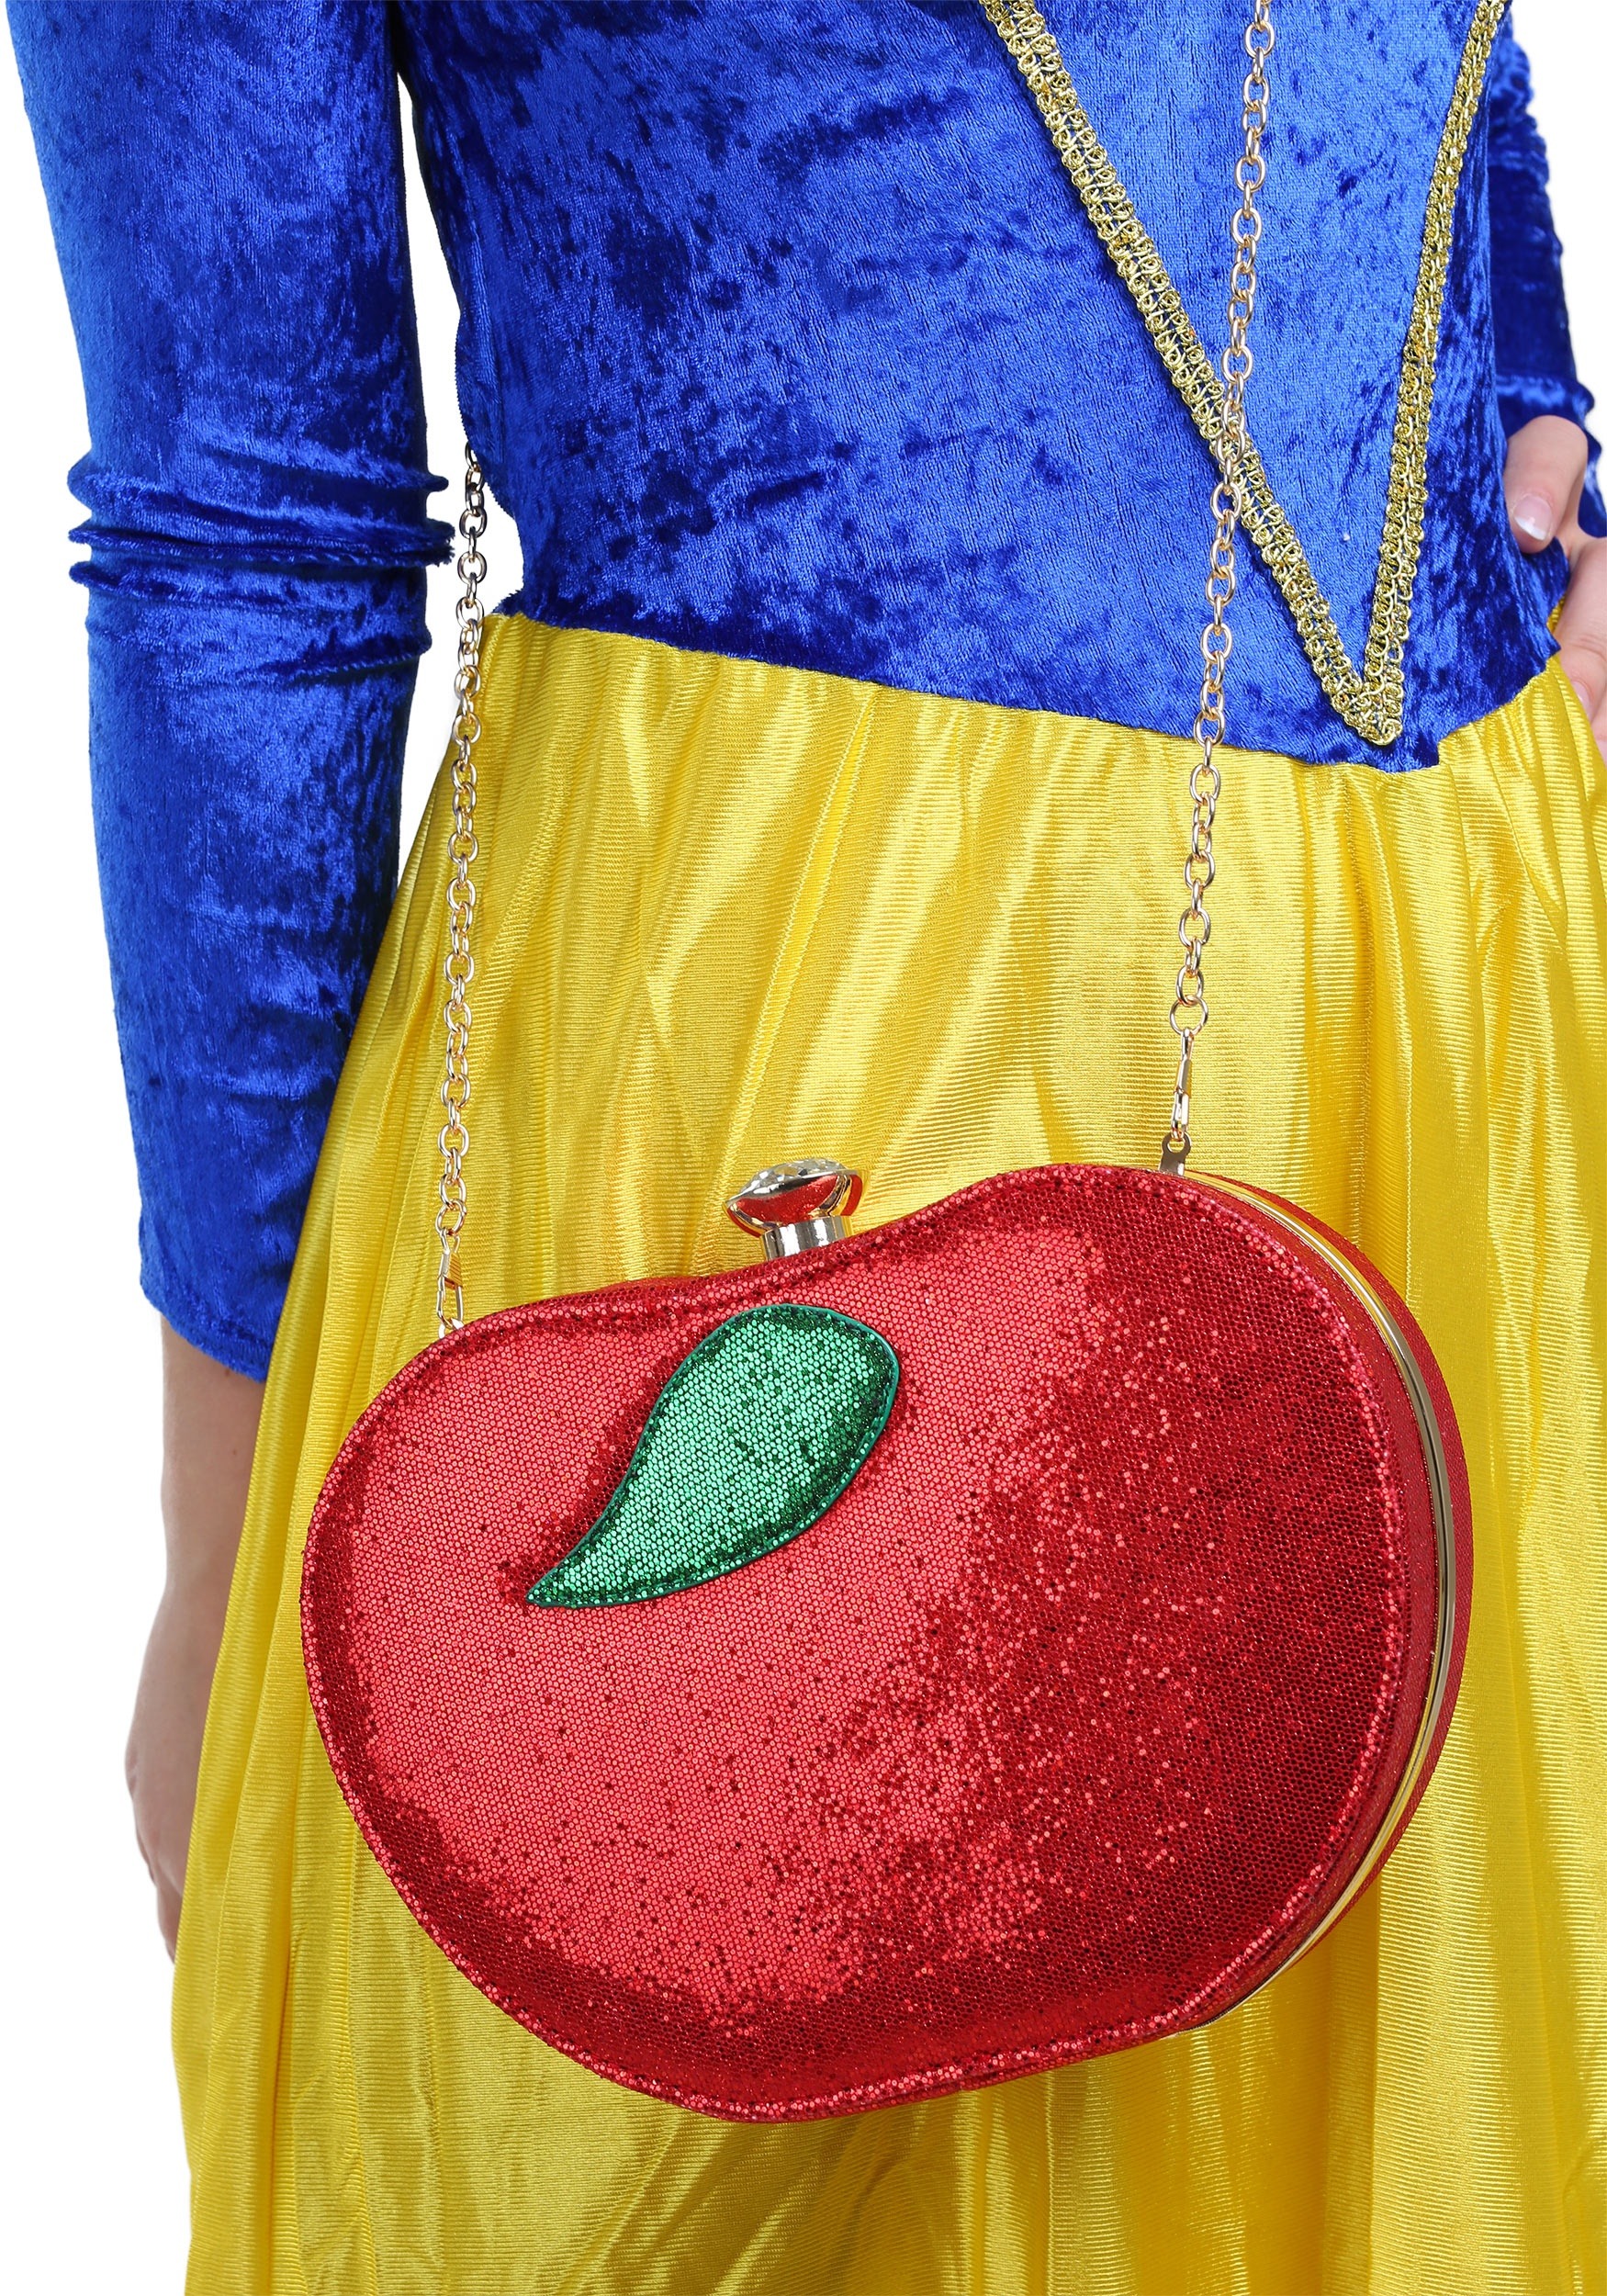 Disney Snow White Evil Queen's Poison Apple Bag by Loungefly - Import It All